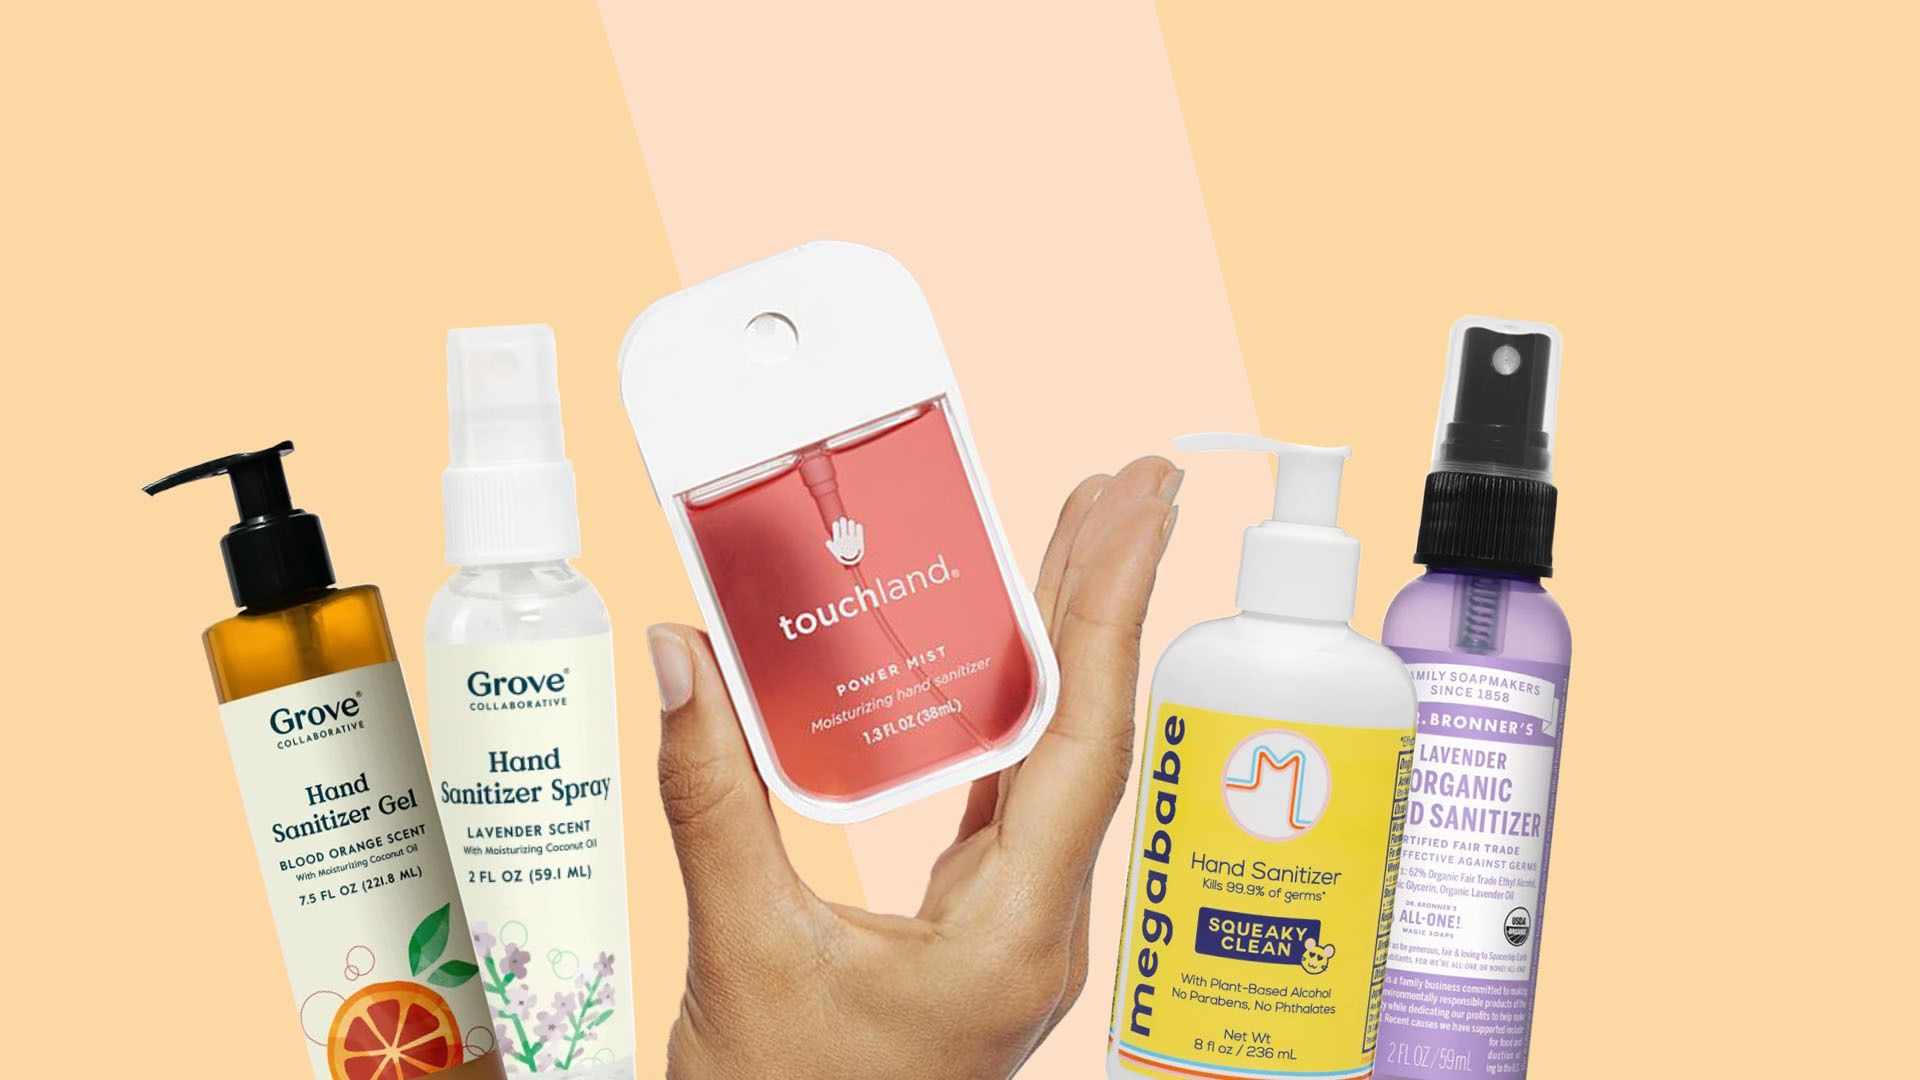 hand sanitizers: Touchland, Megababe and that smell | Underscored